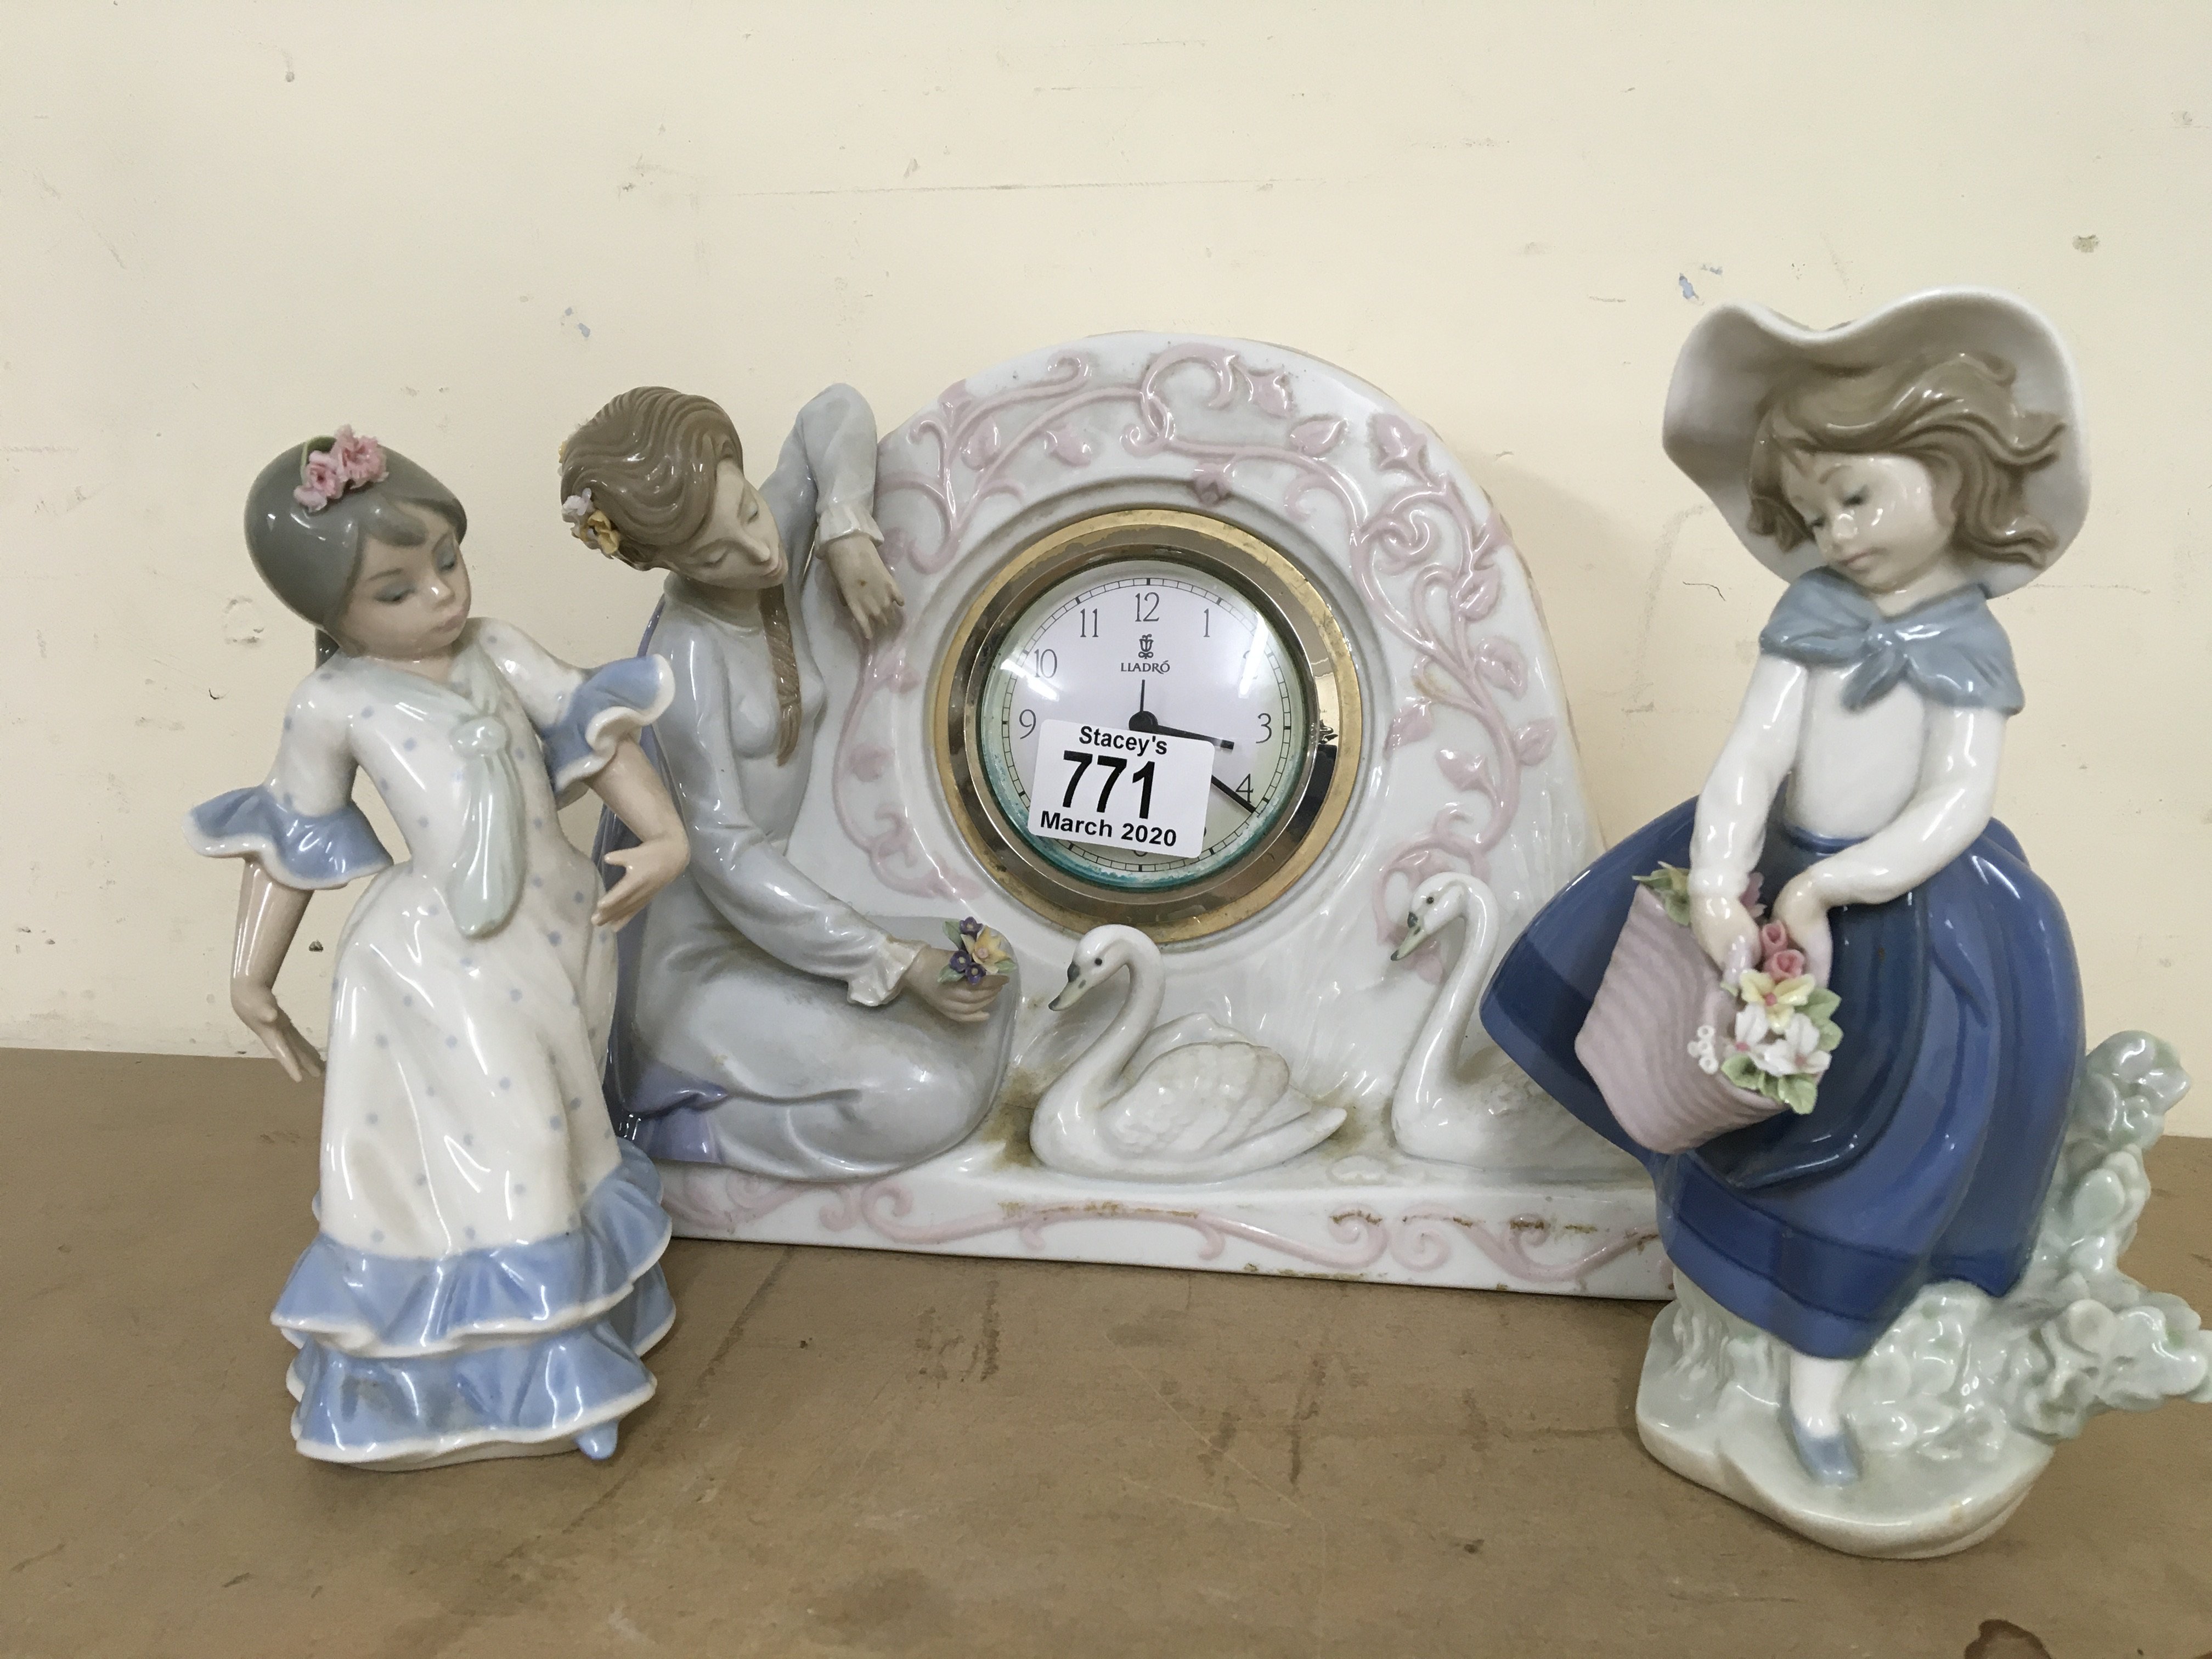 A Lladro porcelain clock figurine and 2 additional